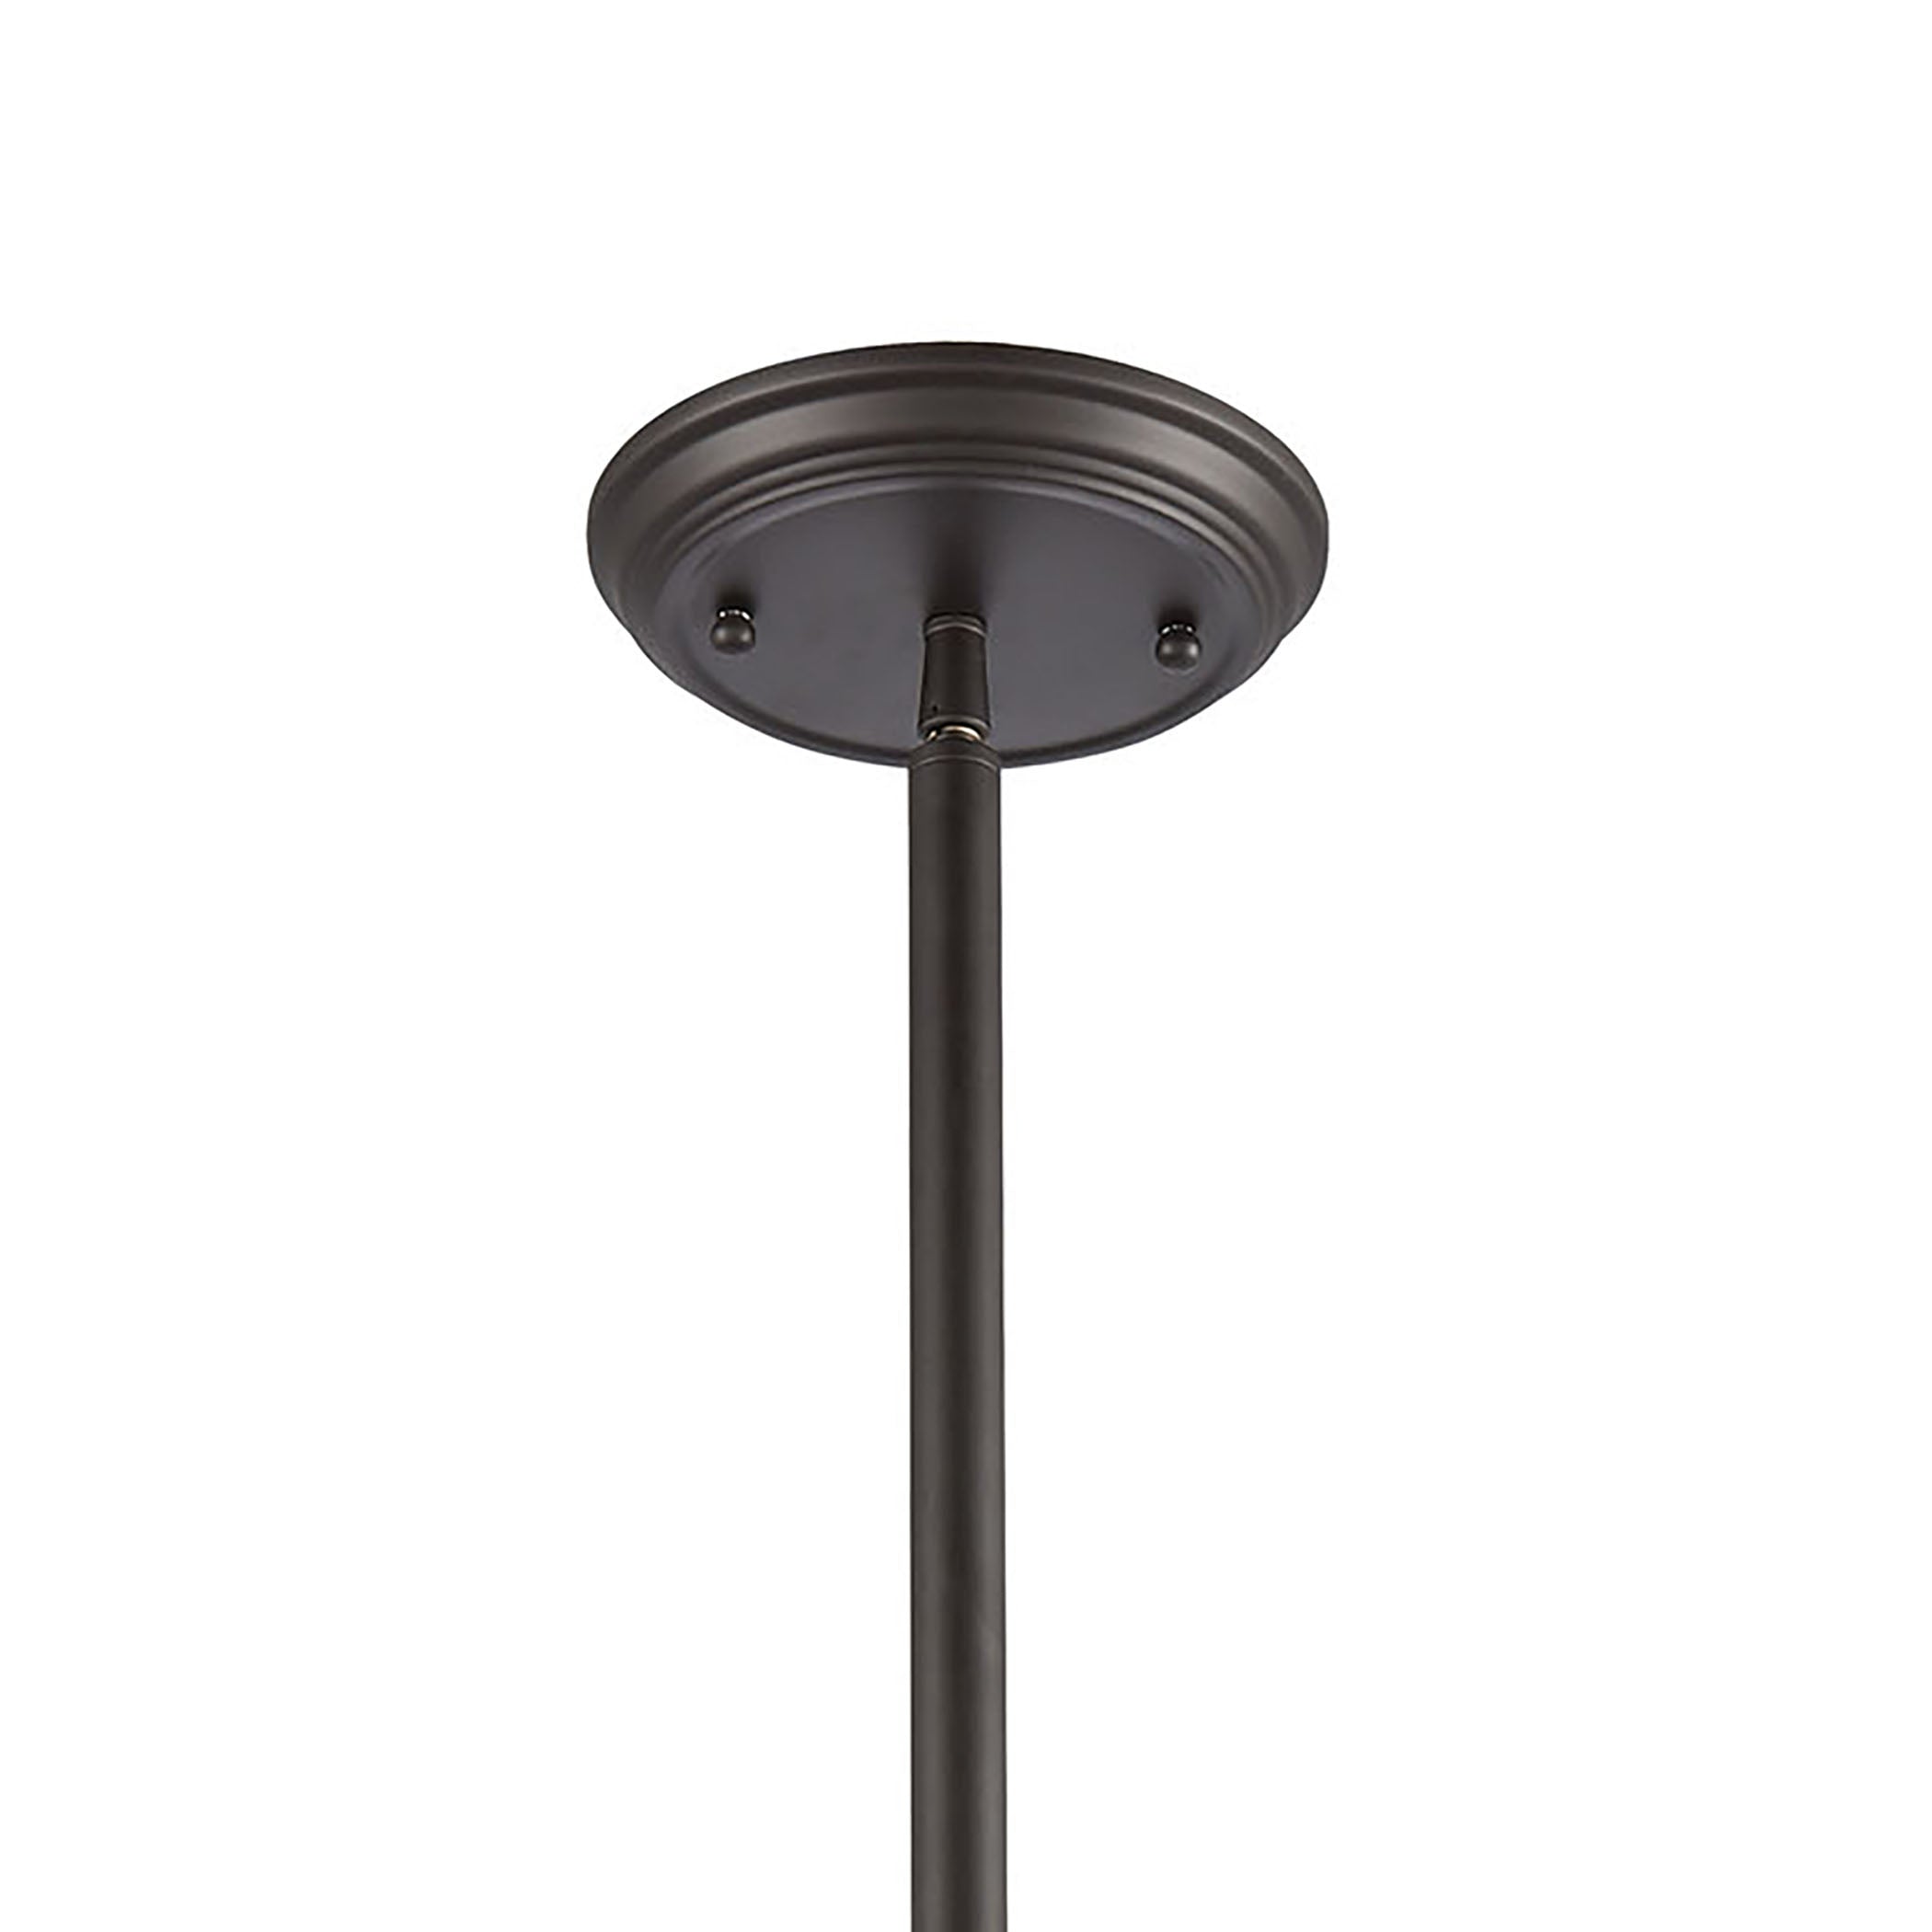 ELK Lighting 66579-1 Chadwick 1-Light Mini Pendant in Oil Rubbed Bronze with Metal and Frosted Glass